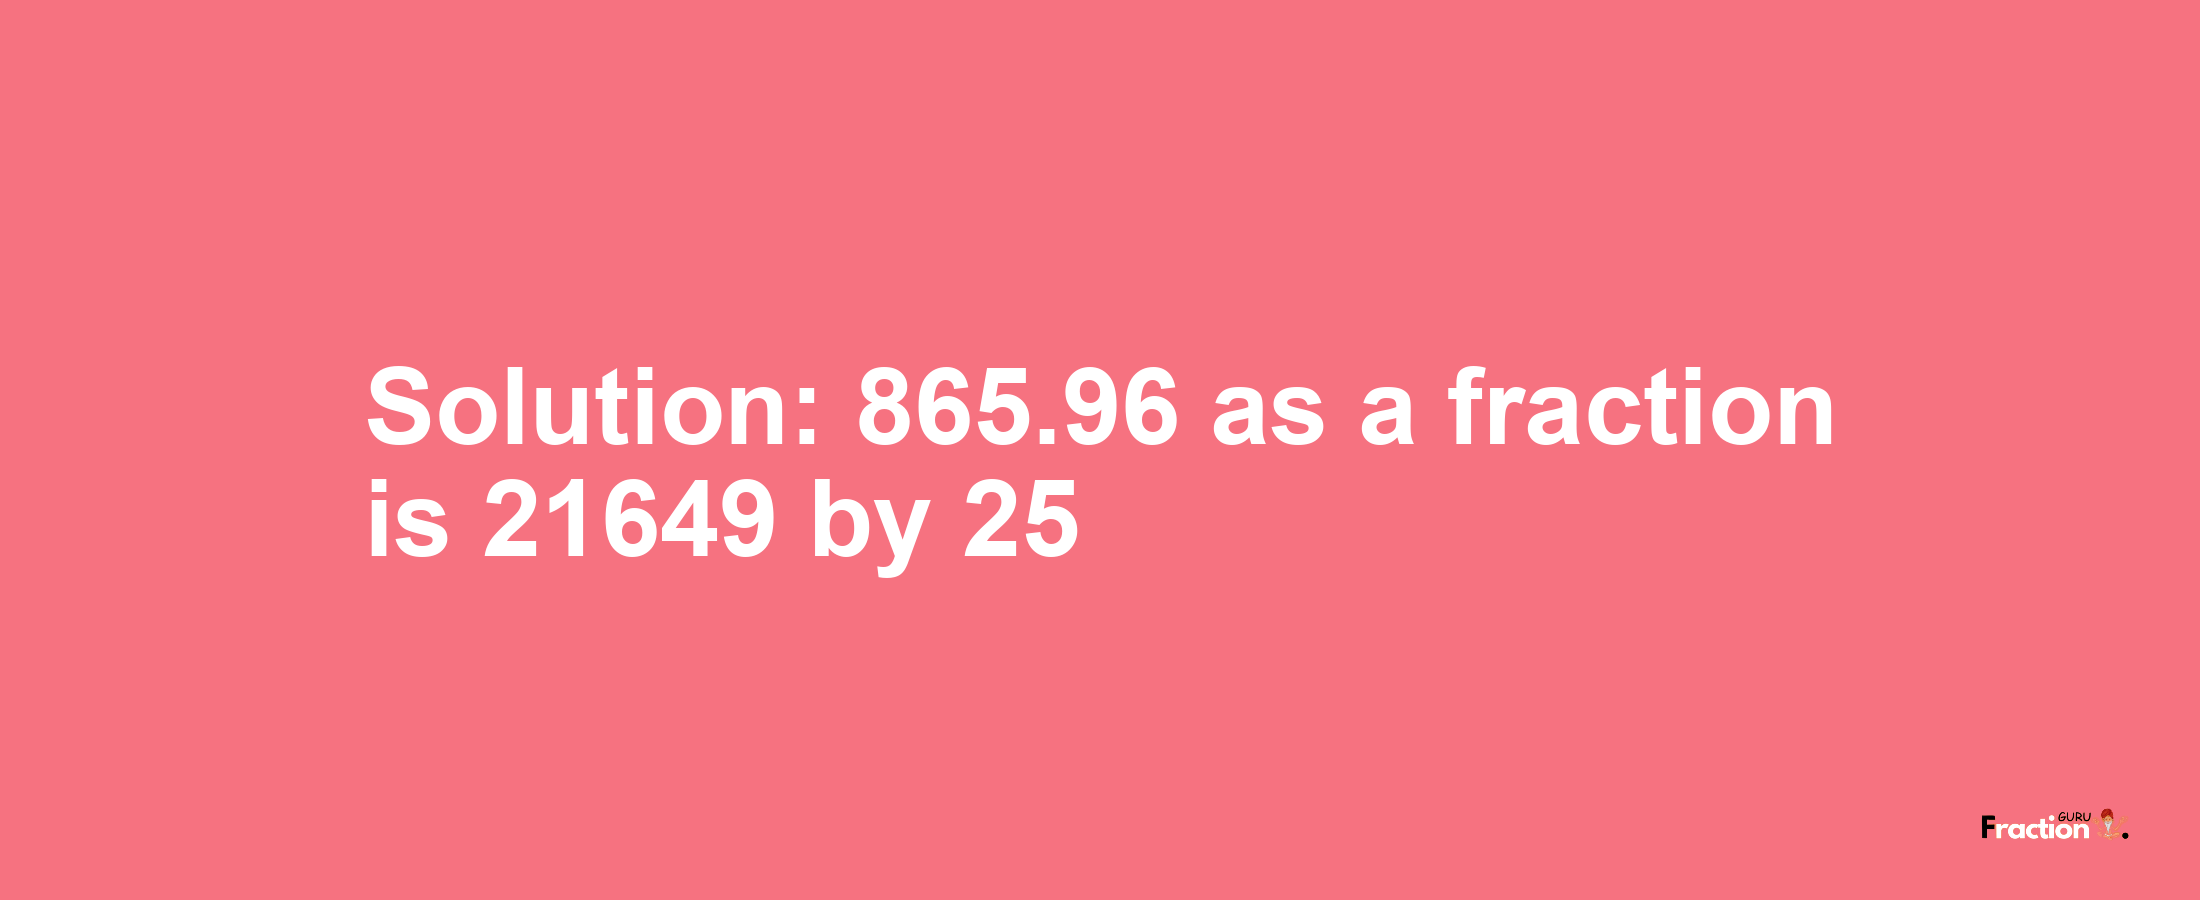 Solution:865.96 as a fraction is 21649/25